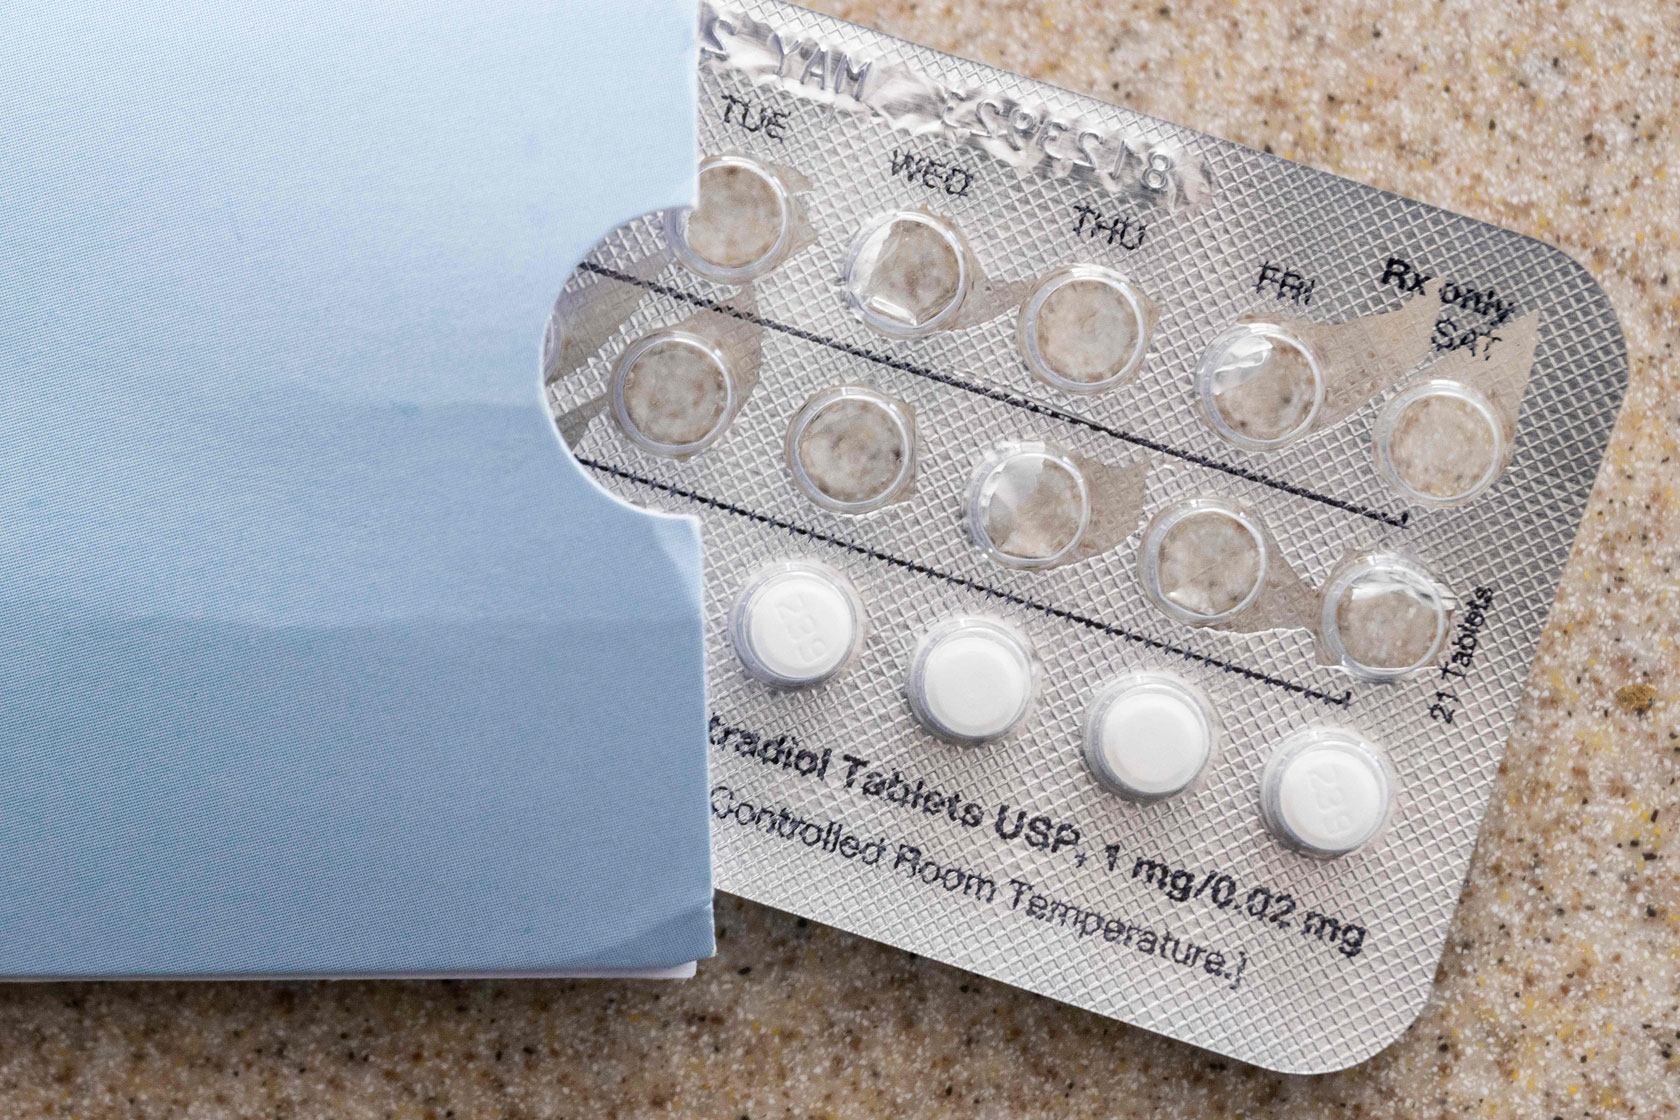 The Effects of Continuous Contraceptive Pill Taking